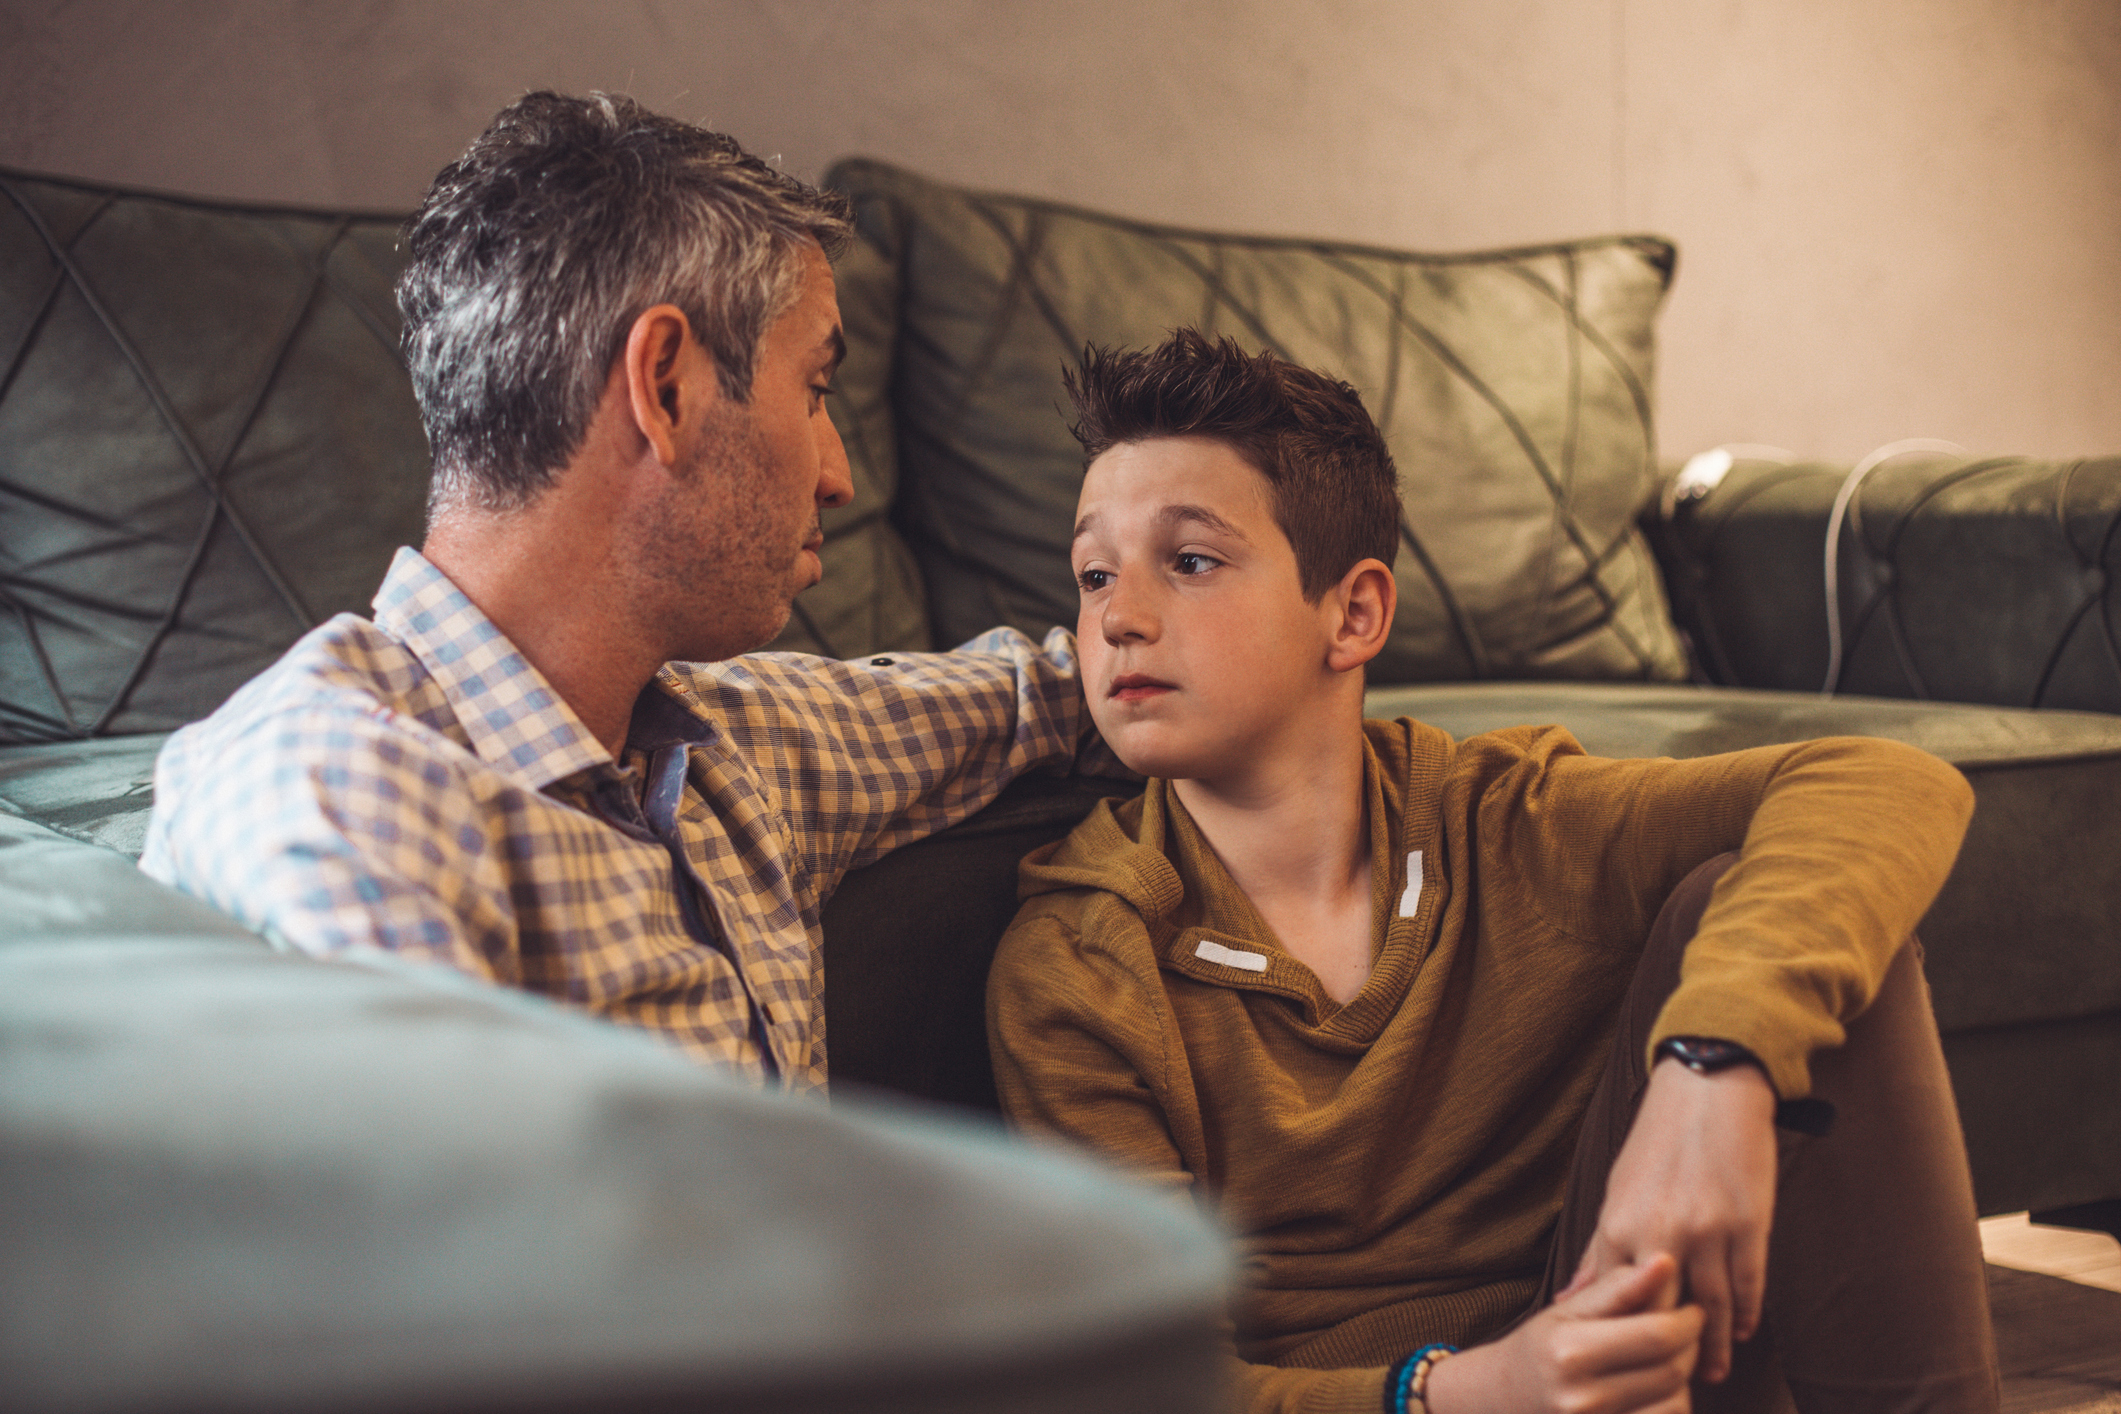 Man and boy sitting on couch in a serious conversation, reflecting a parenting moment